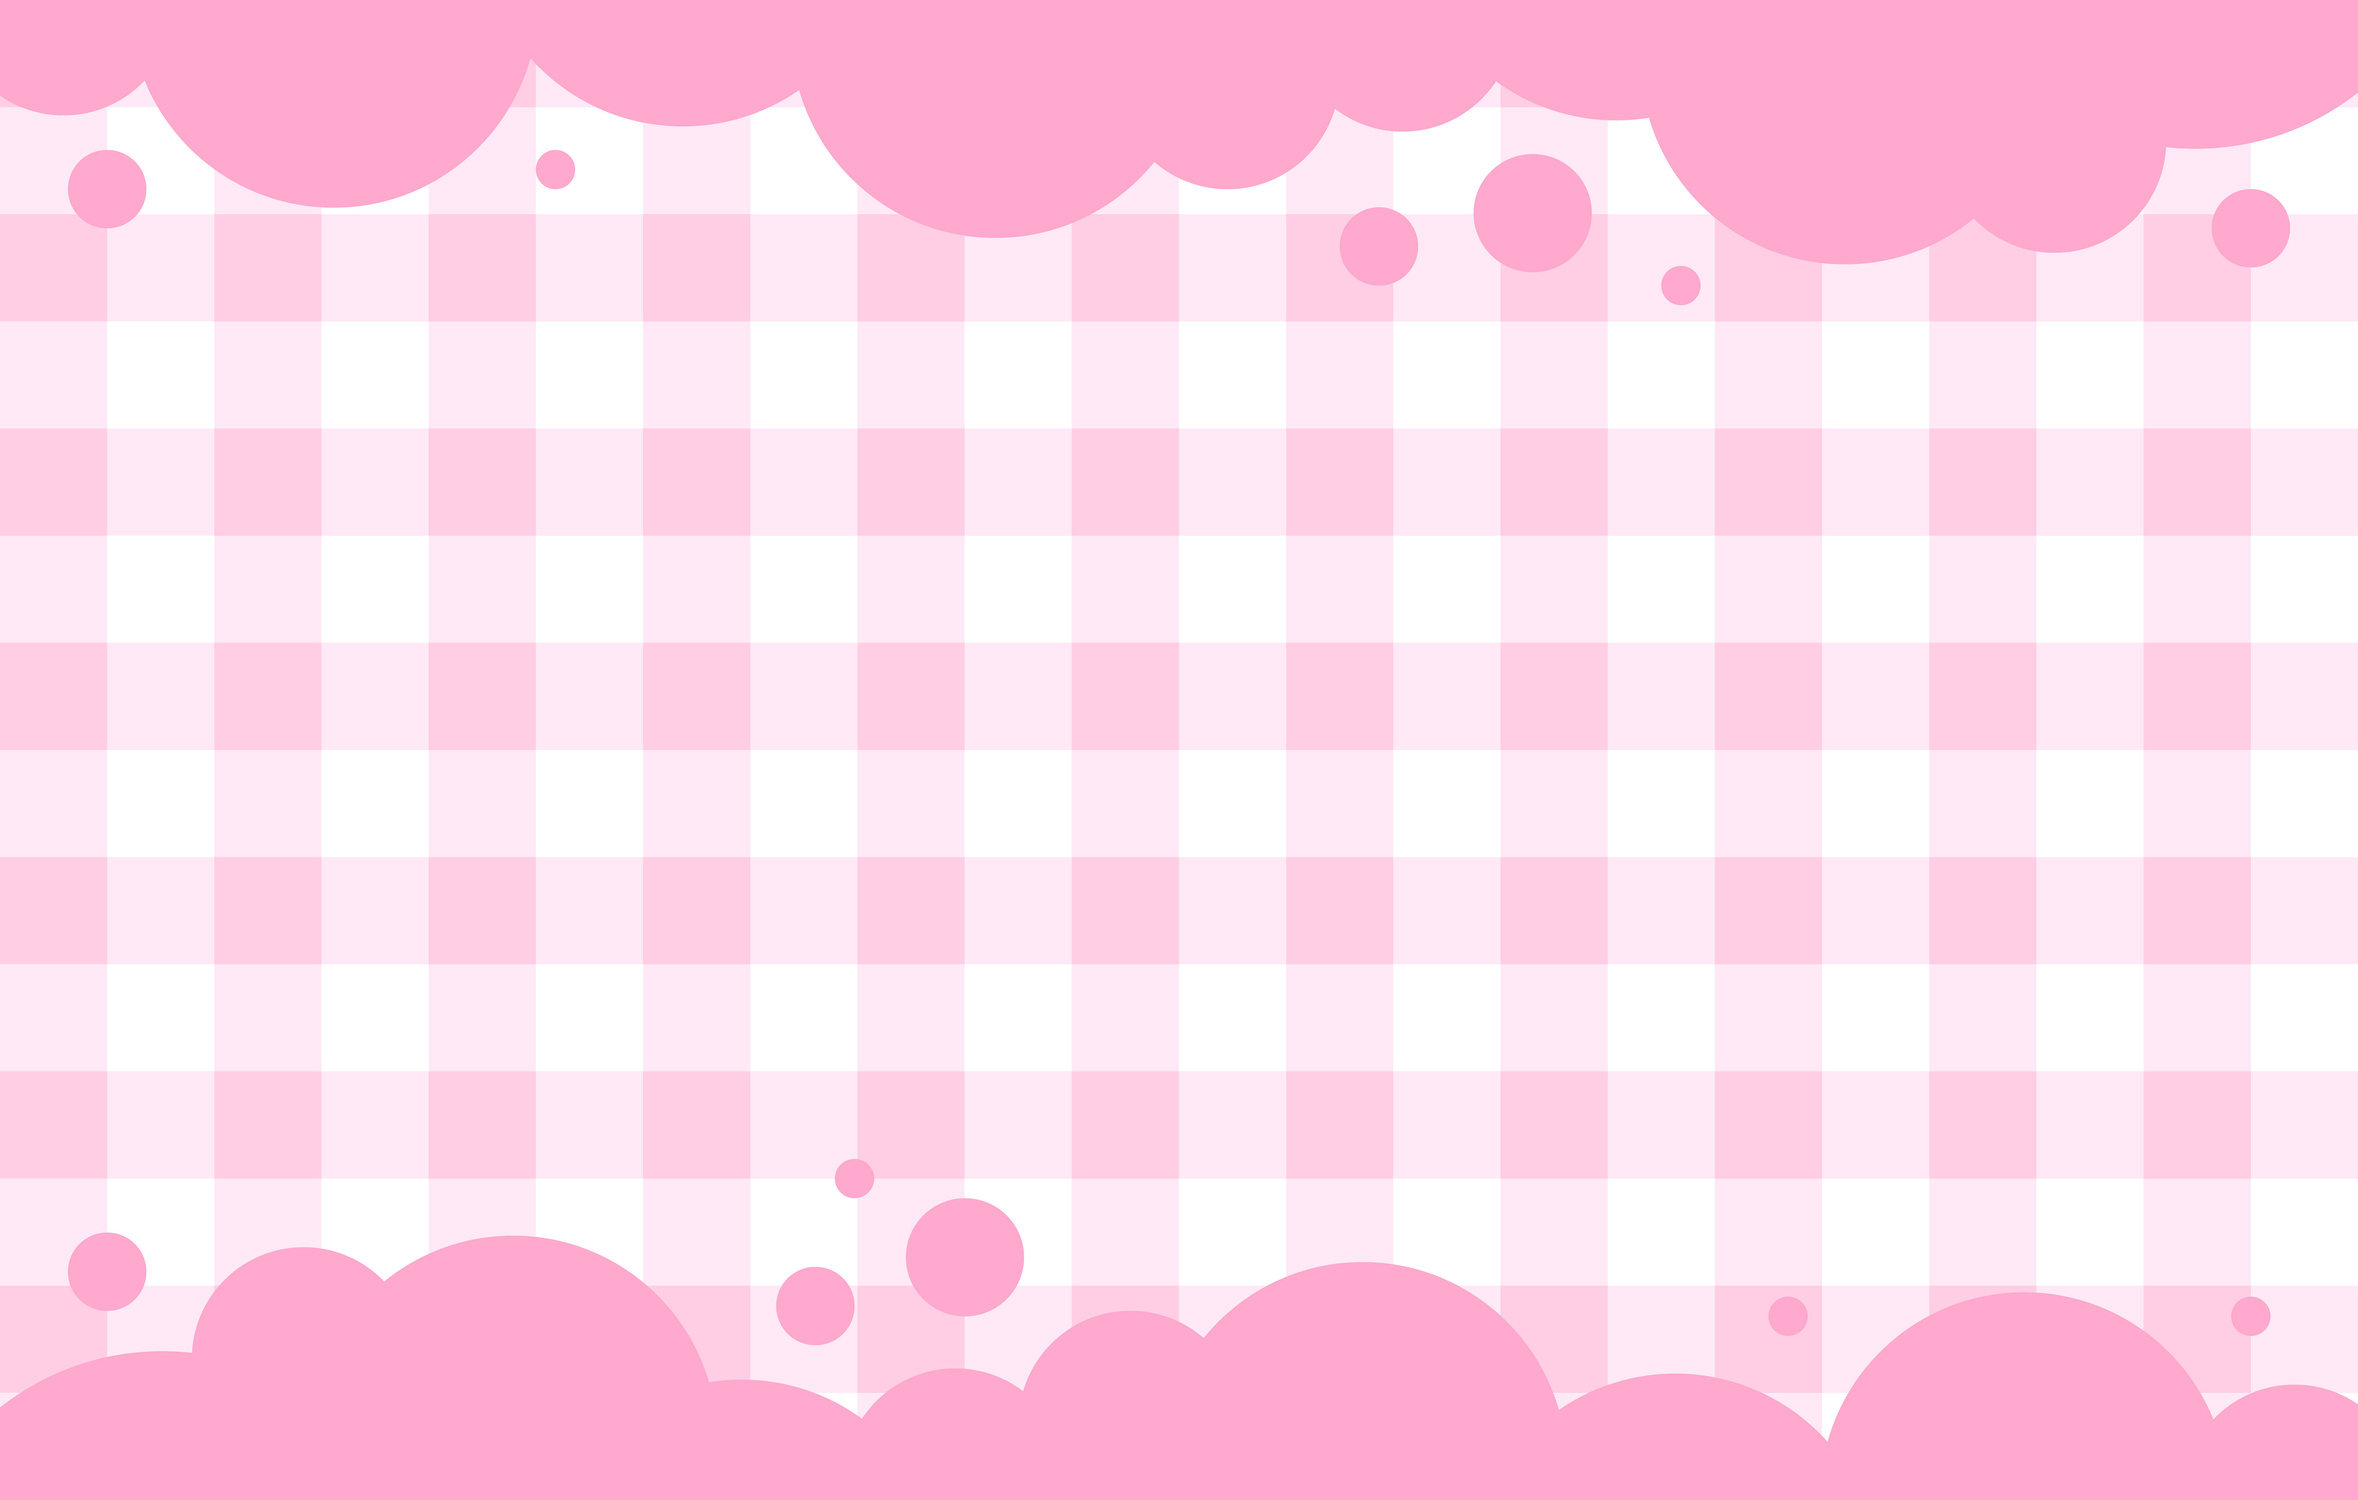 Abstract pink background. Decoration banner themed Lol surprise